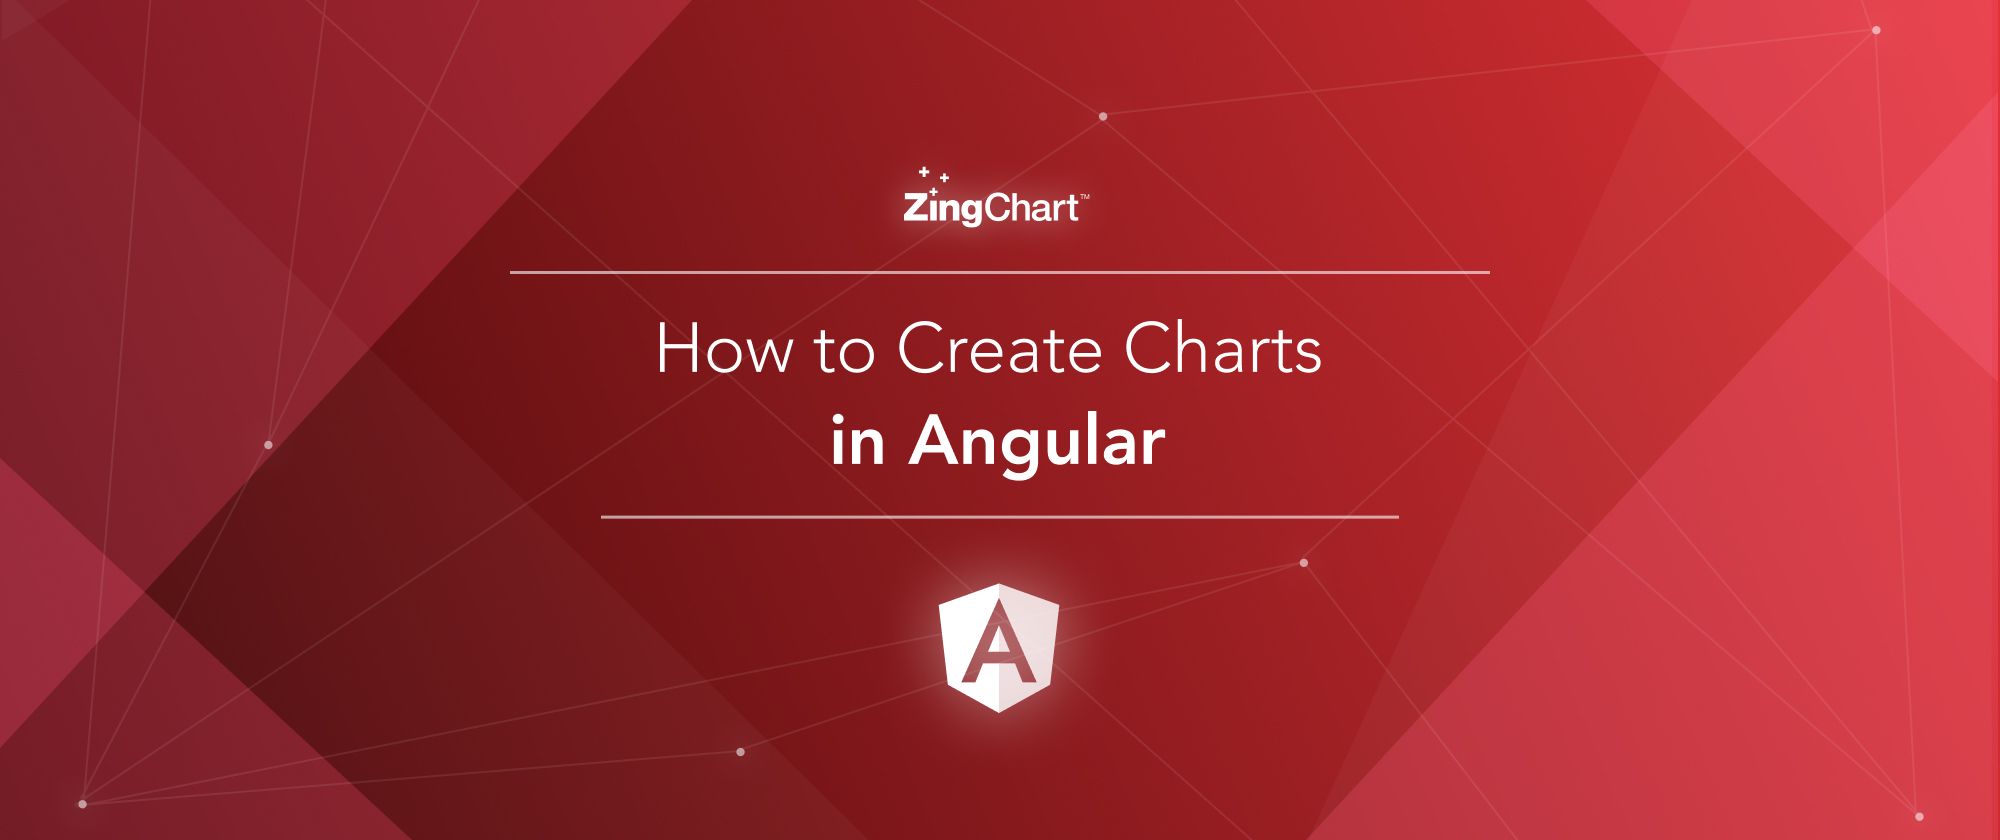 How to Create Charts in Angular with ZingChart